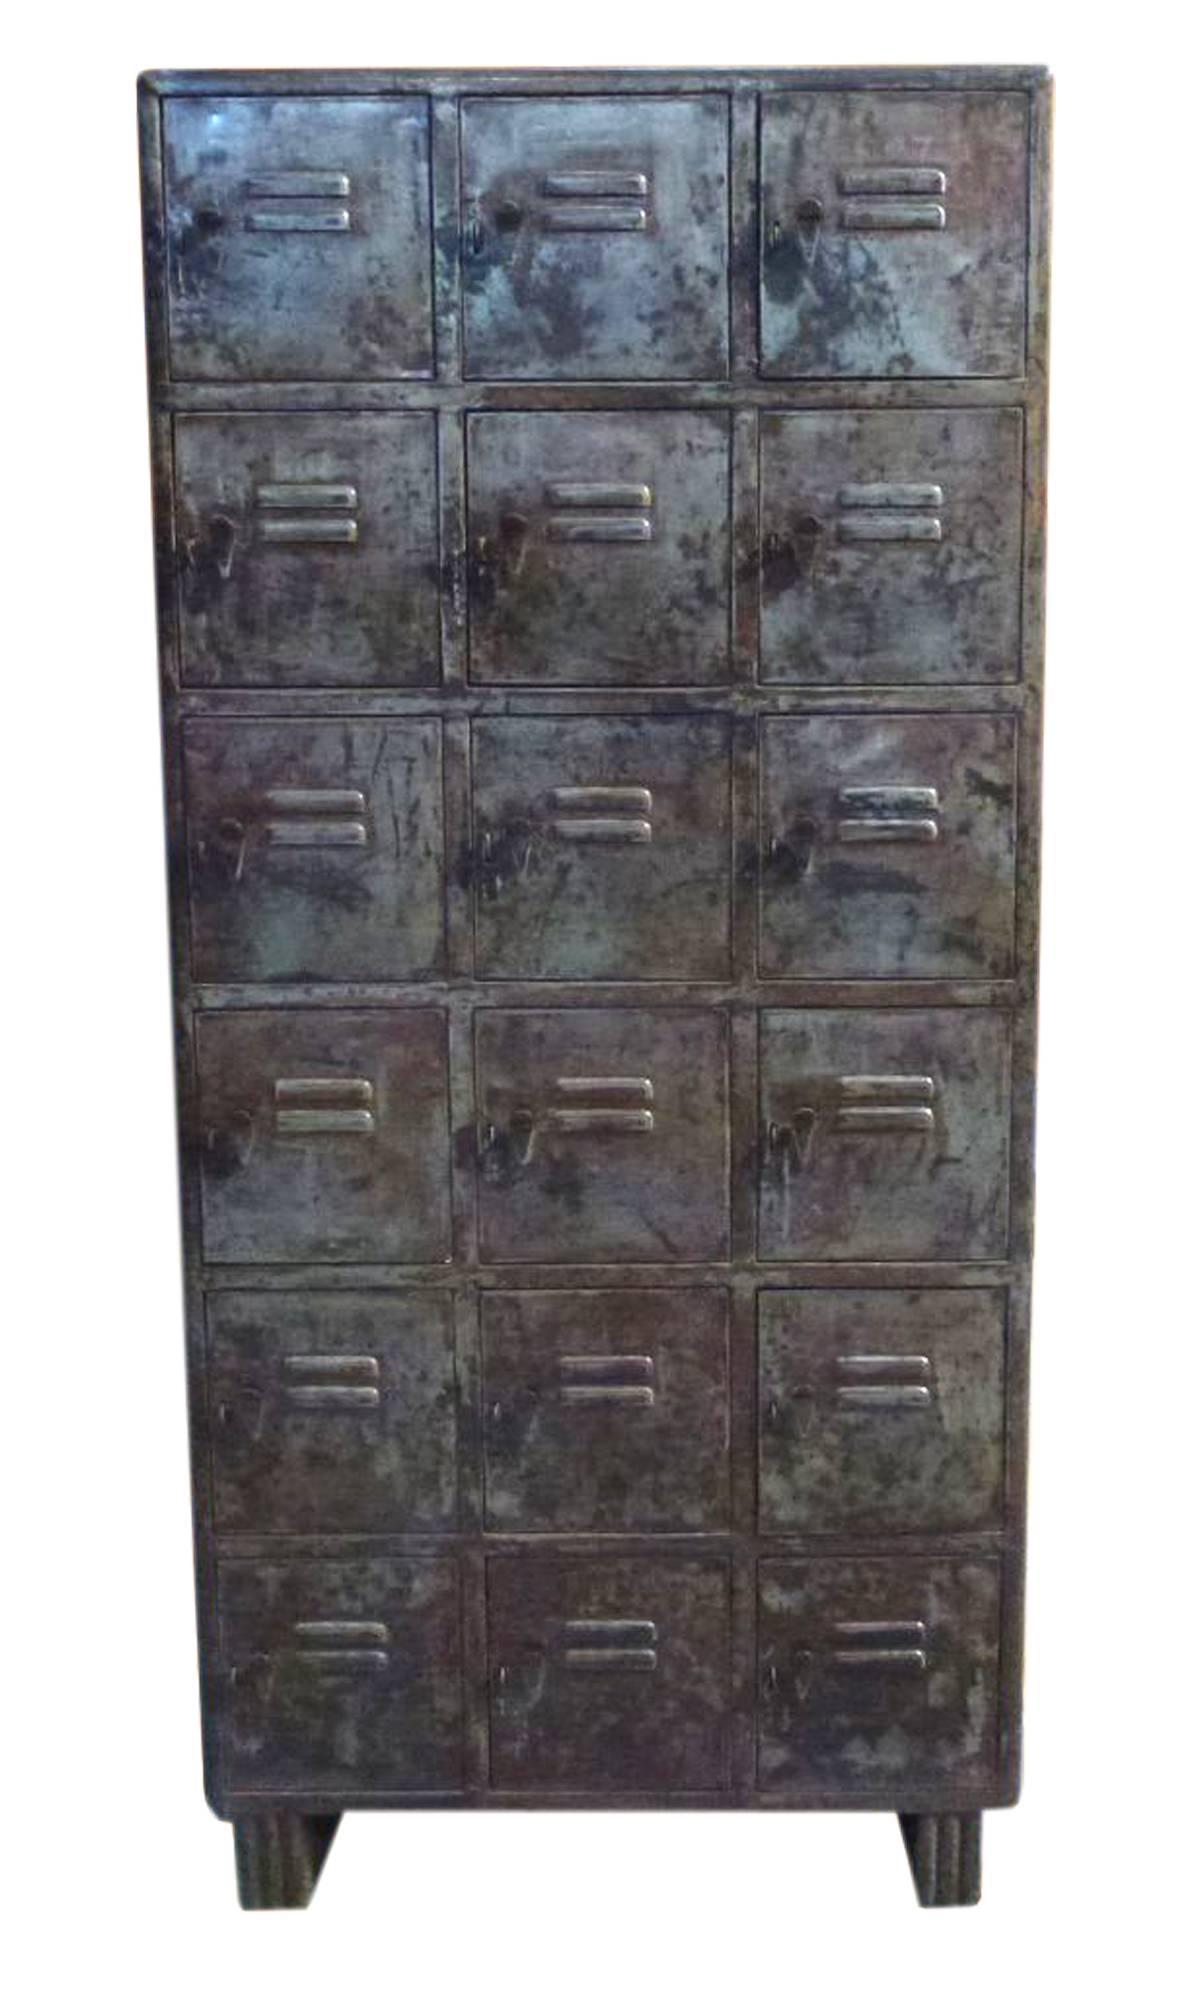 1940 iron Industrial cabinet, 18 drawers inside size 31 / 46 / 30 cm 12.2"/18"/11.8".
See photo before restoration. Ideal for your kitchen or your office!
 